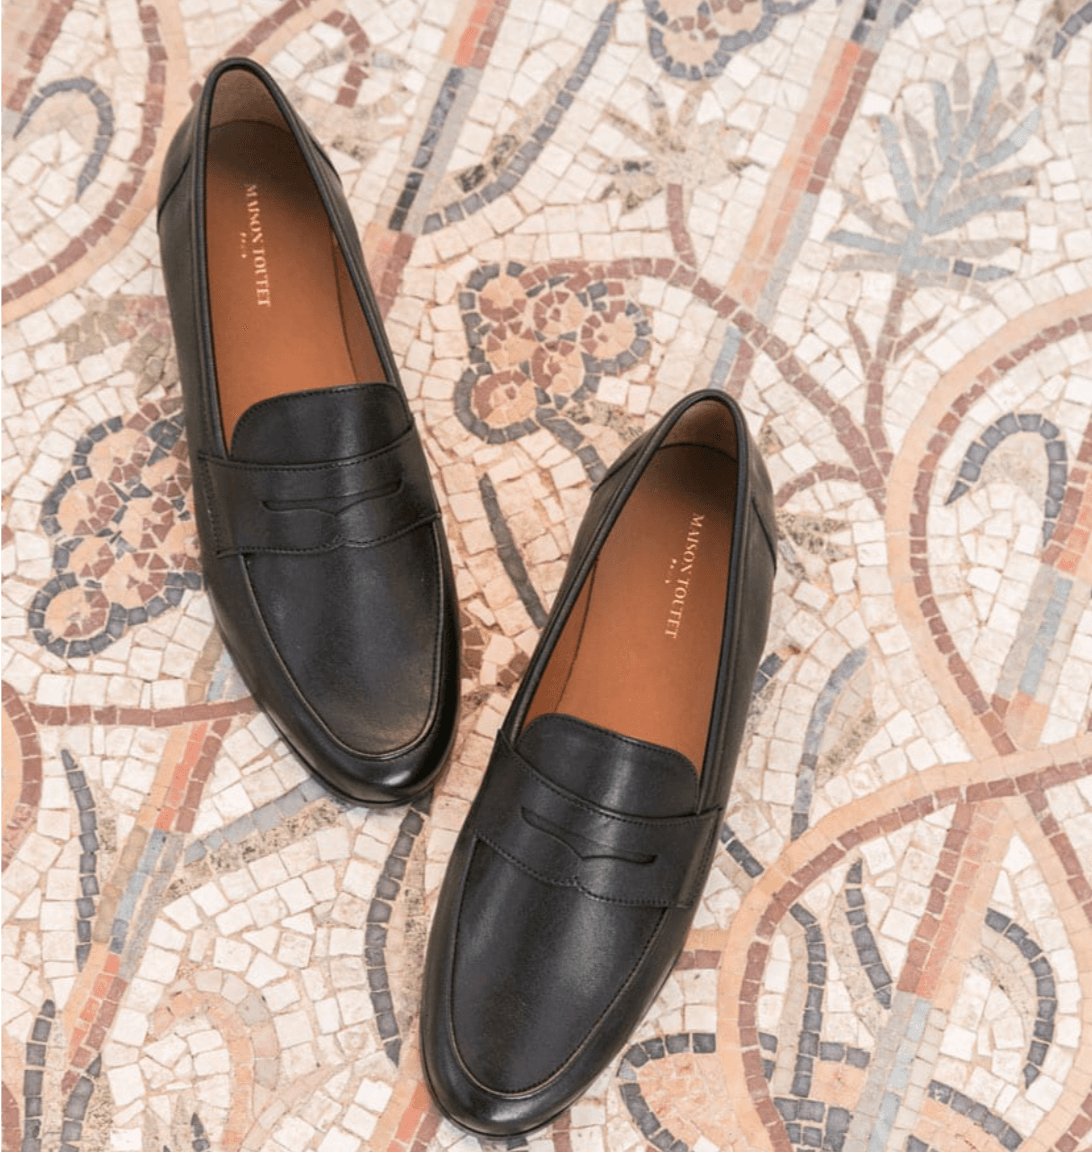 Maison Toufet Hanna black Loafer - MADE THE EDIT